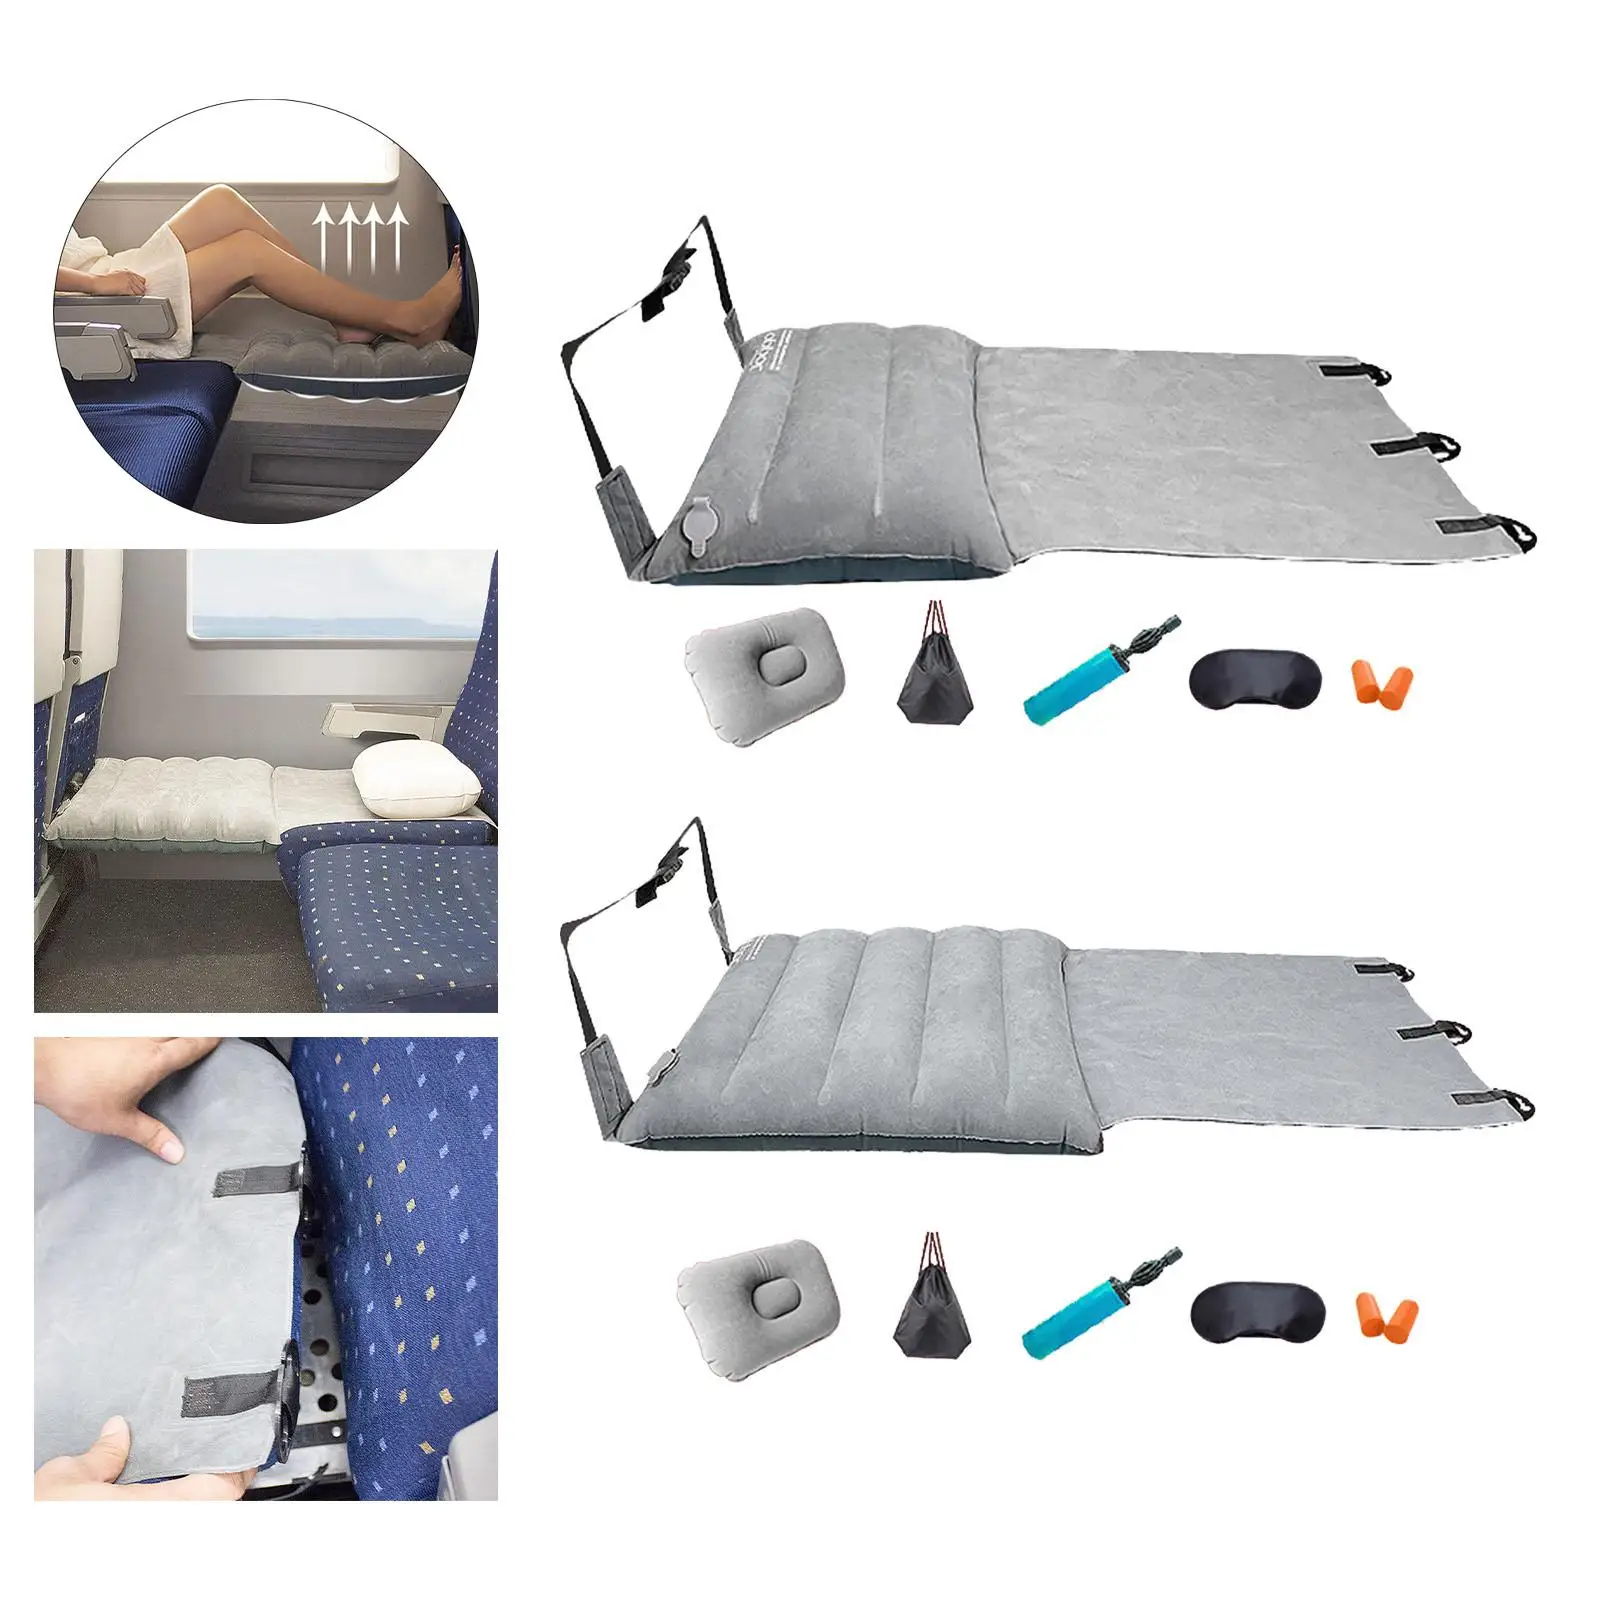 Airplane Footrest Hammock for Kids Inflatable Elevate Legs Strong Load Bearing Flights Travel Foot Rest Plane Seat Extender